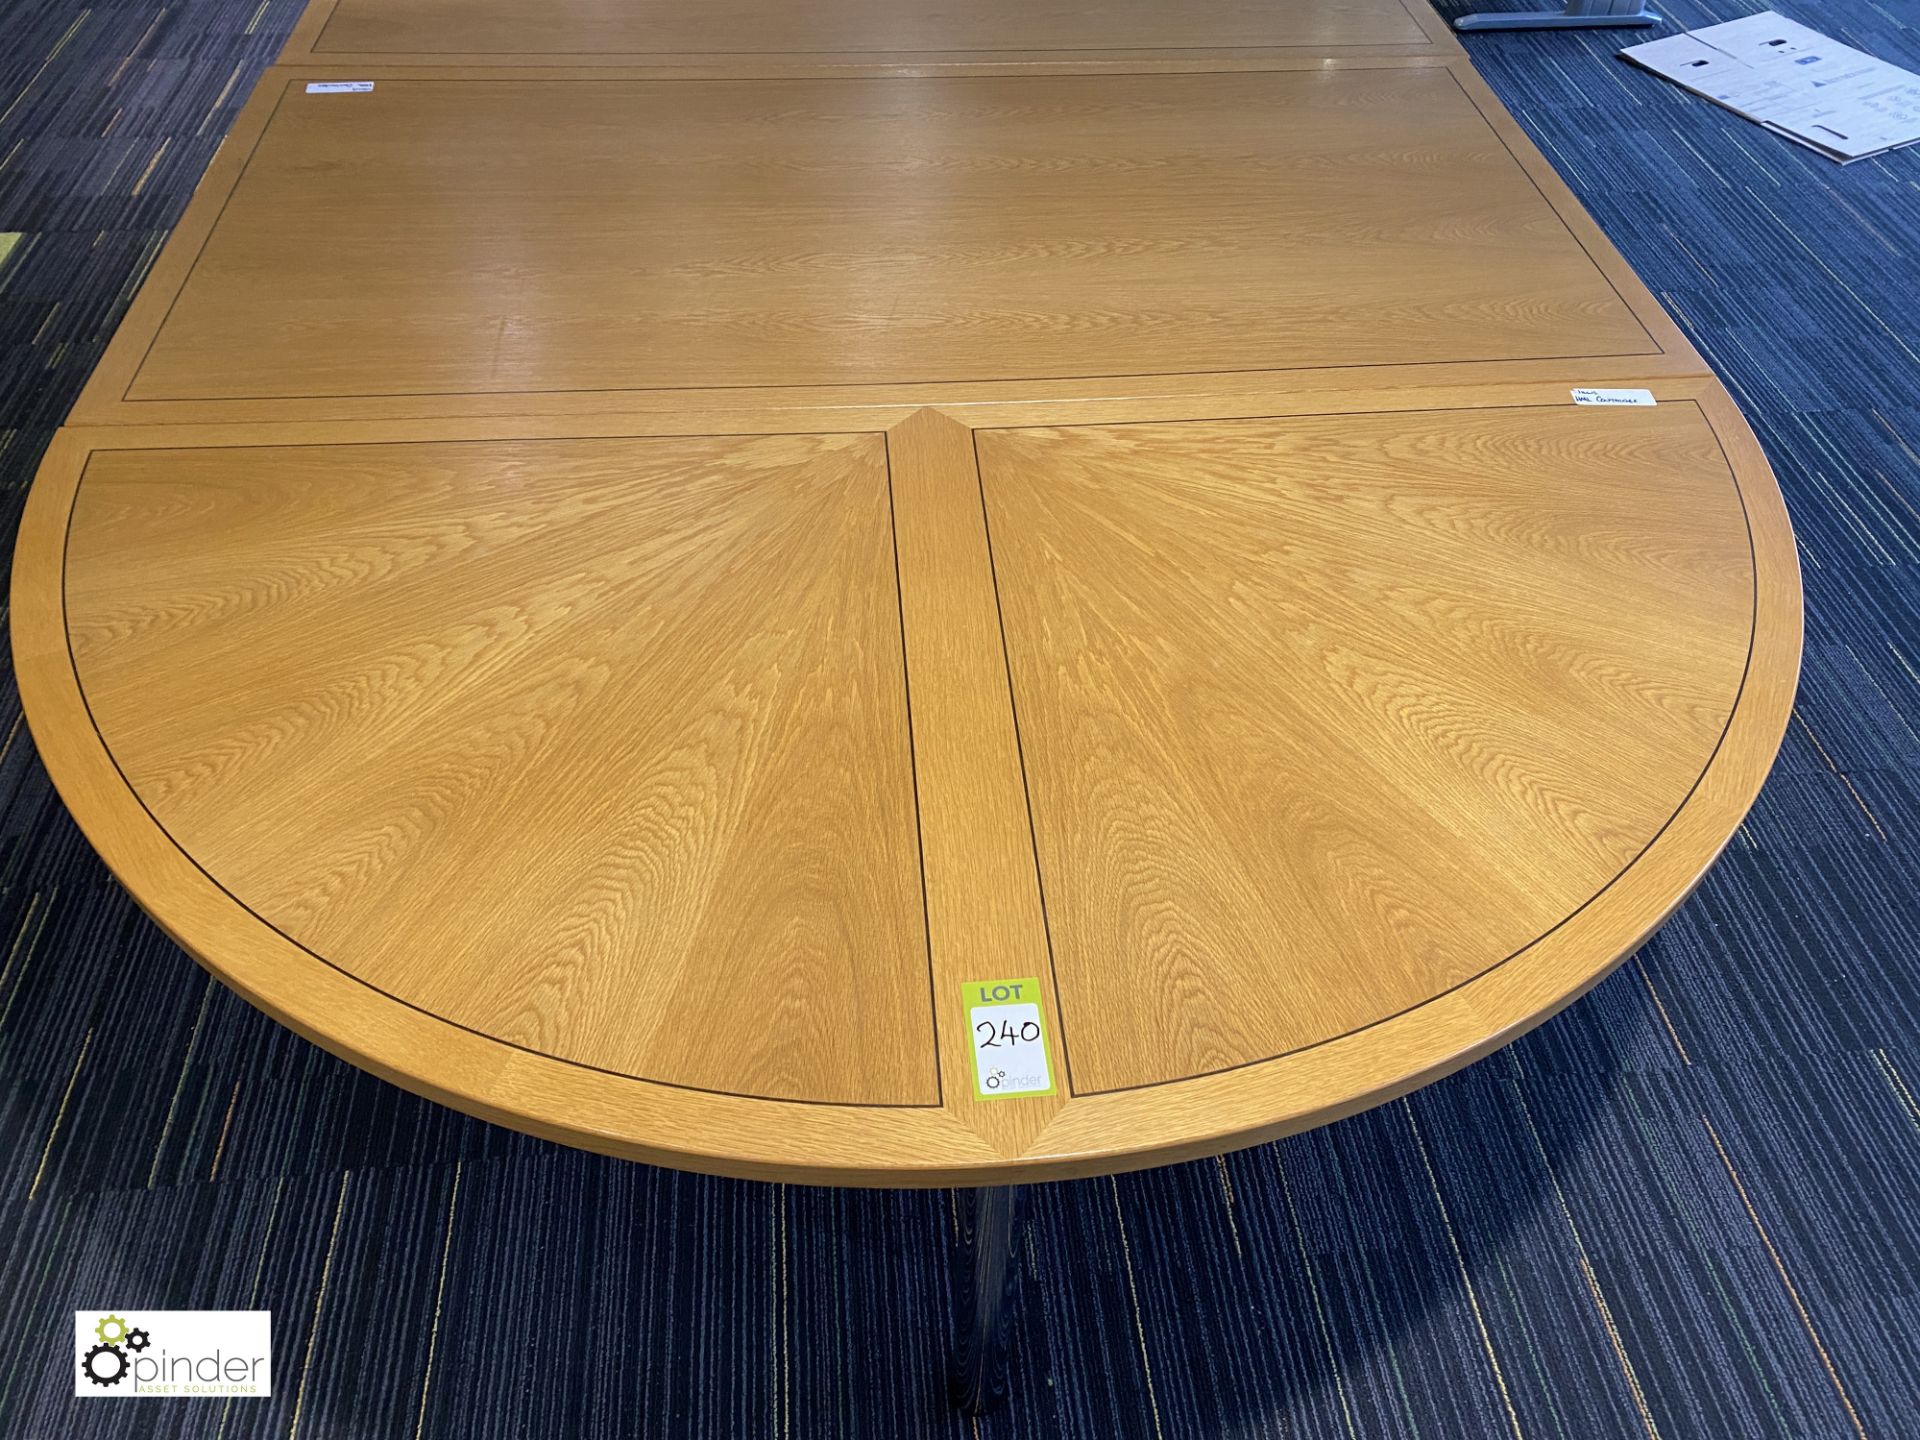 Light oak inlaid 4-section Boardroom Table, total overall dimension 4000mm x 2000mm - Image 5 of 8